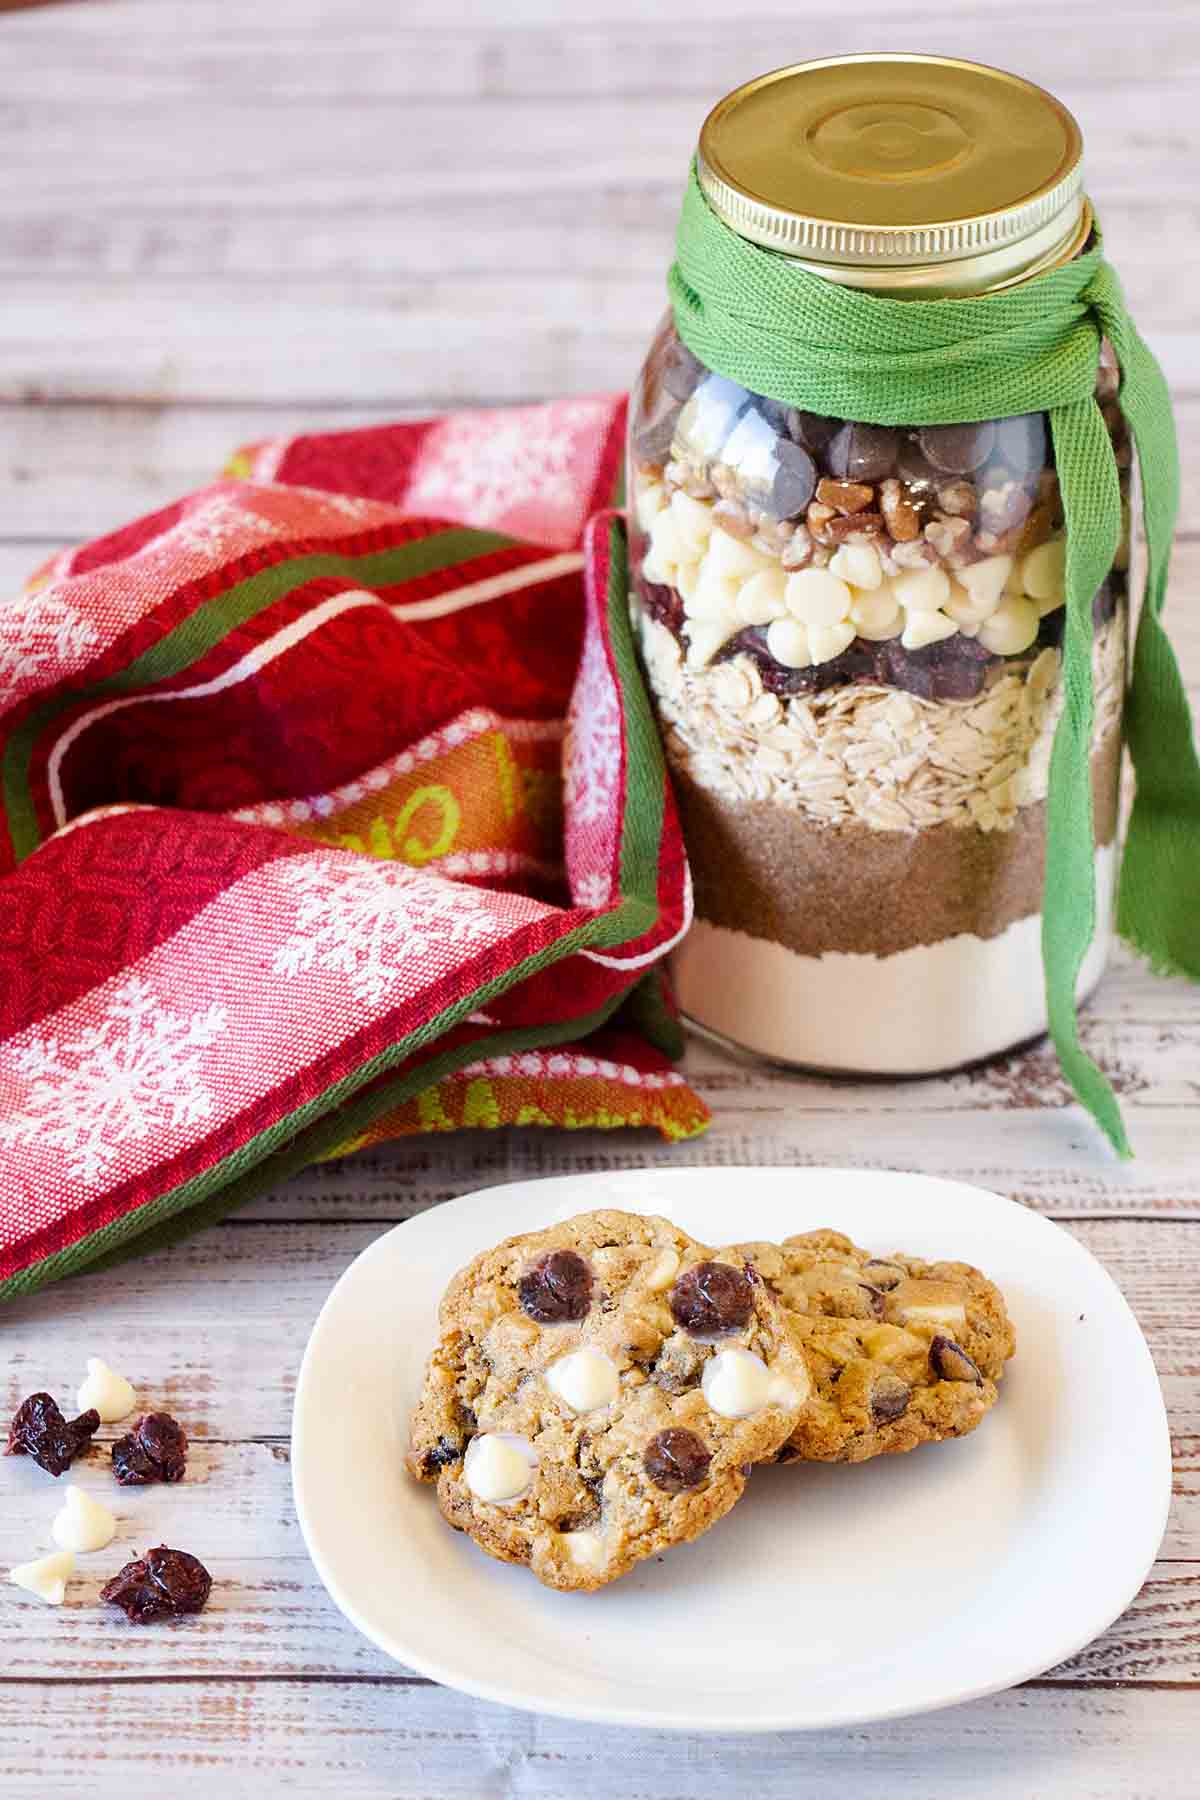 Cookie Mix In a Jar: White Chocolate Cranberry Cookies